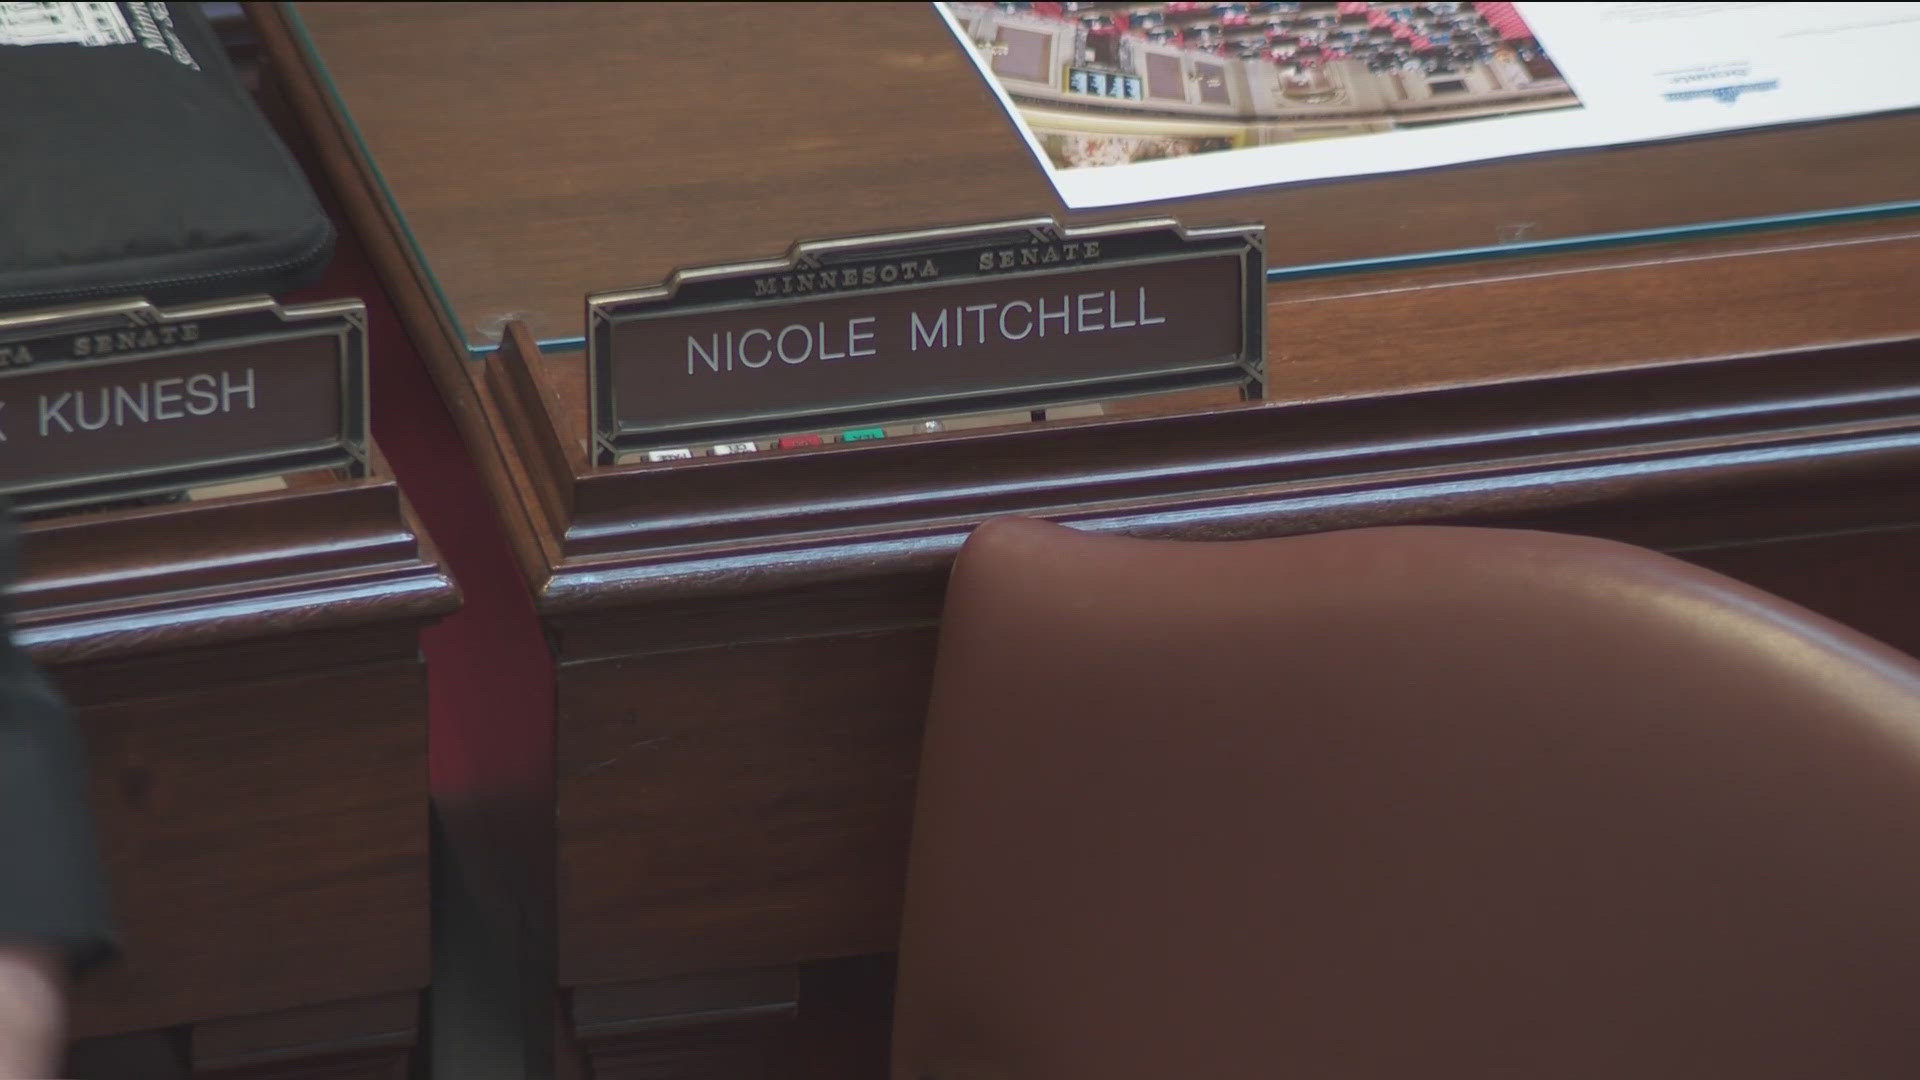 Senate Republicans filed an ethics complaint against Democratic State Sen. Nicole Mitchell, who is charged with breaking in to her stepmother's house.